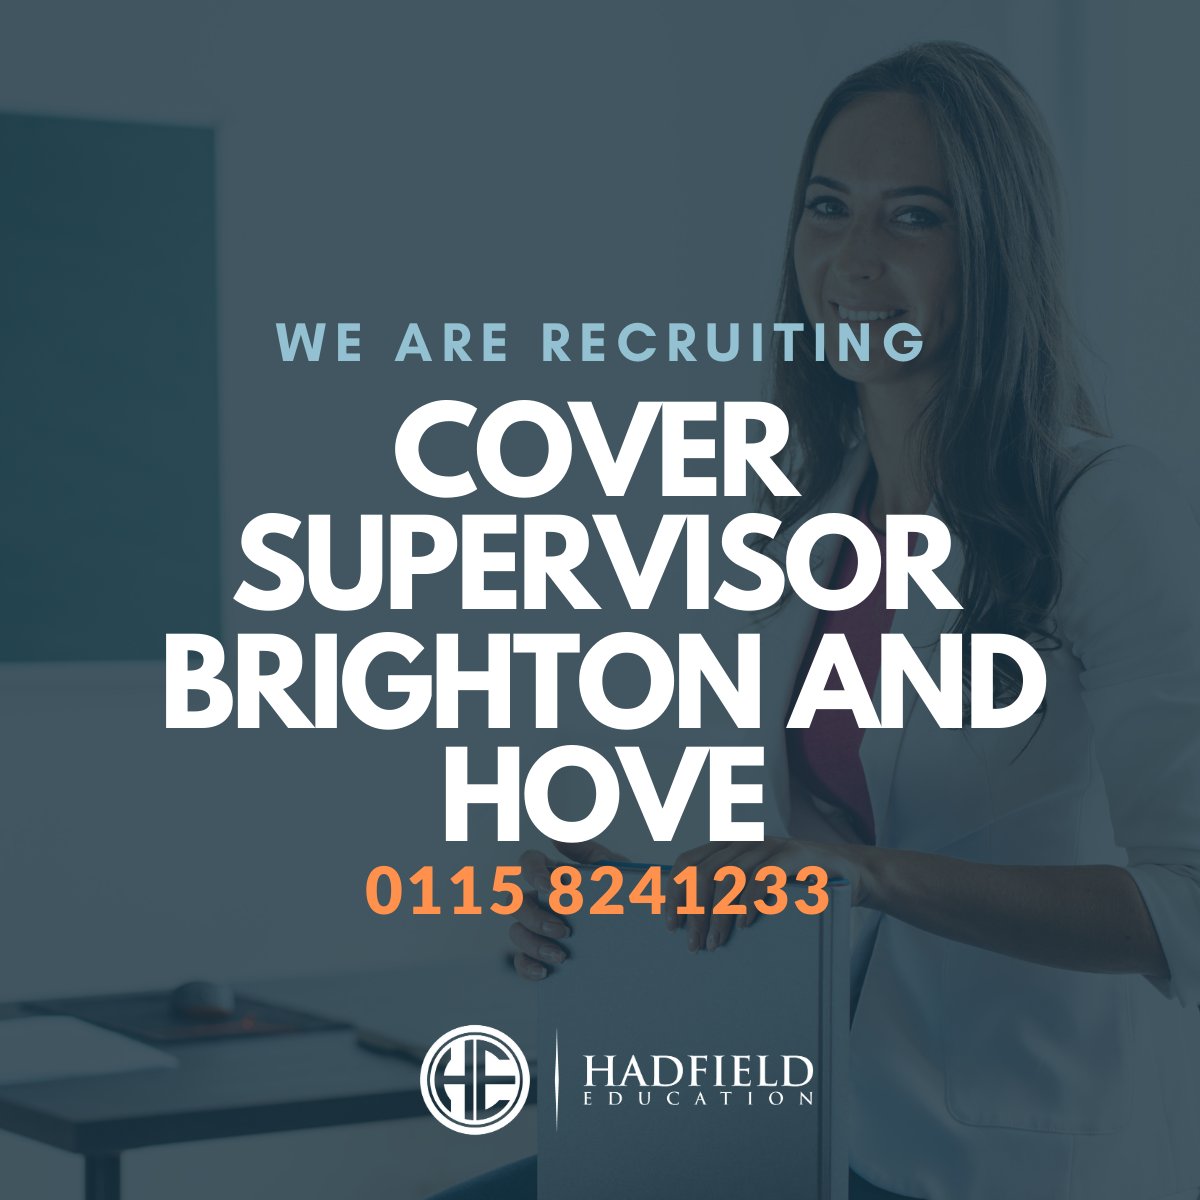 📢 Exciting job opportunity! 📢 Become a Cover Supervisor in 📍Brighton and Hove! 🎓 Join our team and make a difference! 💼 #BrightonJobs #TeachingJobs #CoverSupervisorJobs 🚀 bit.ly/3OS5WYX